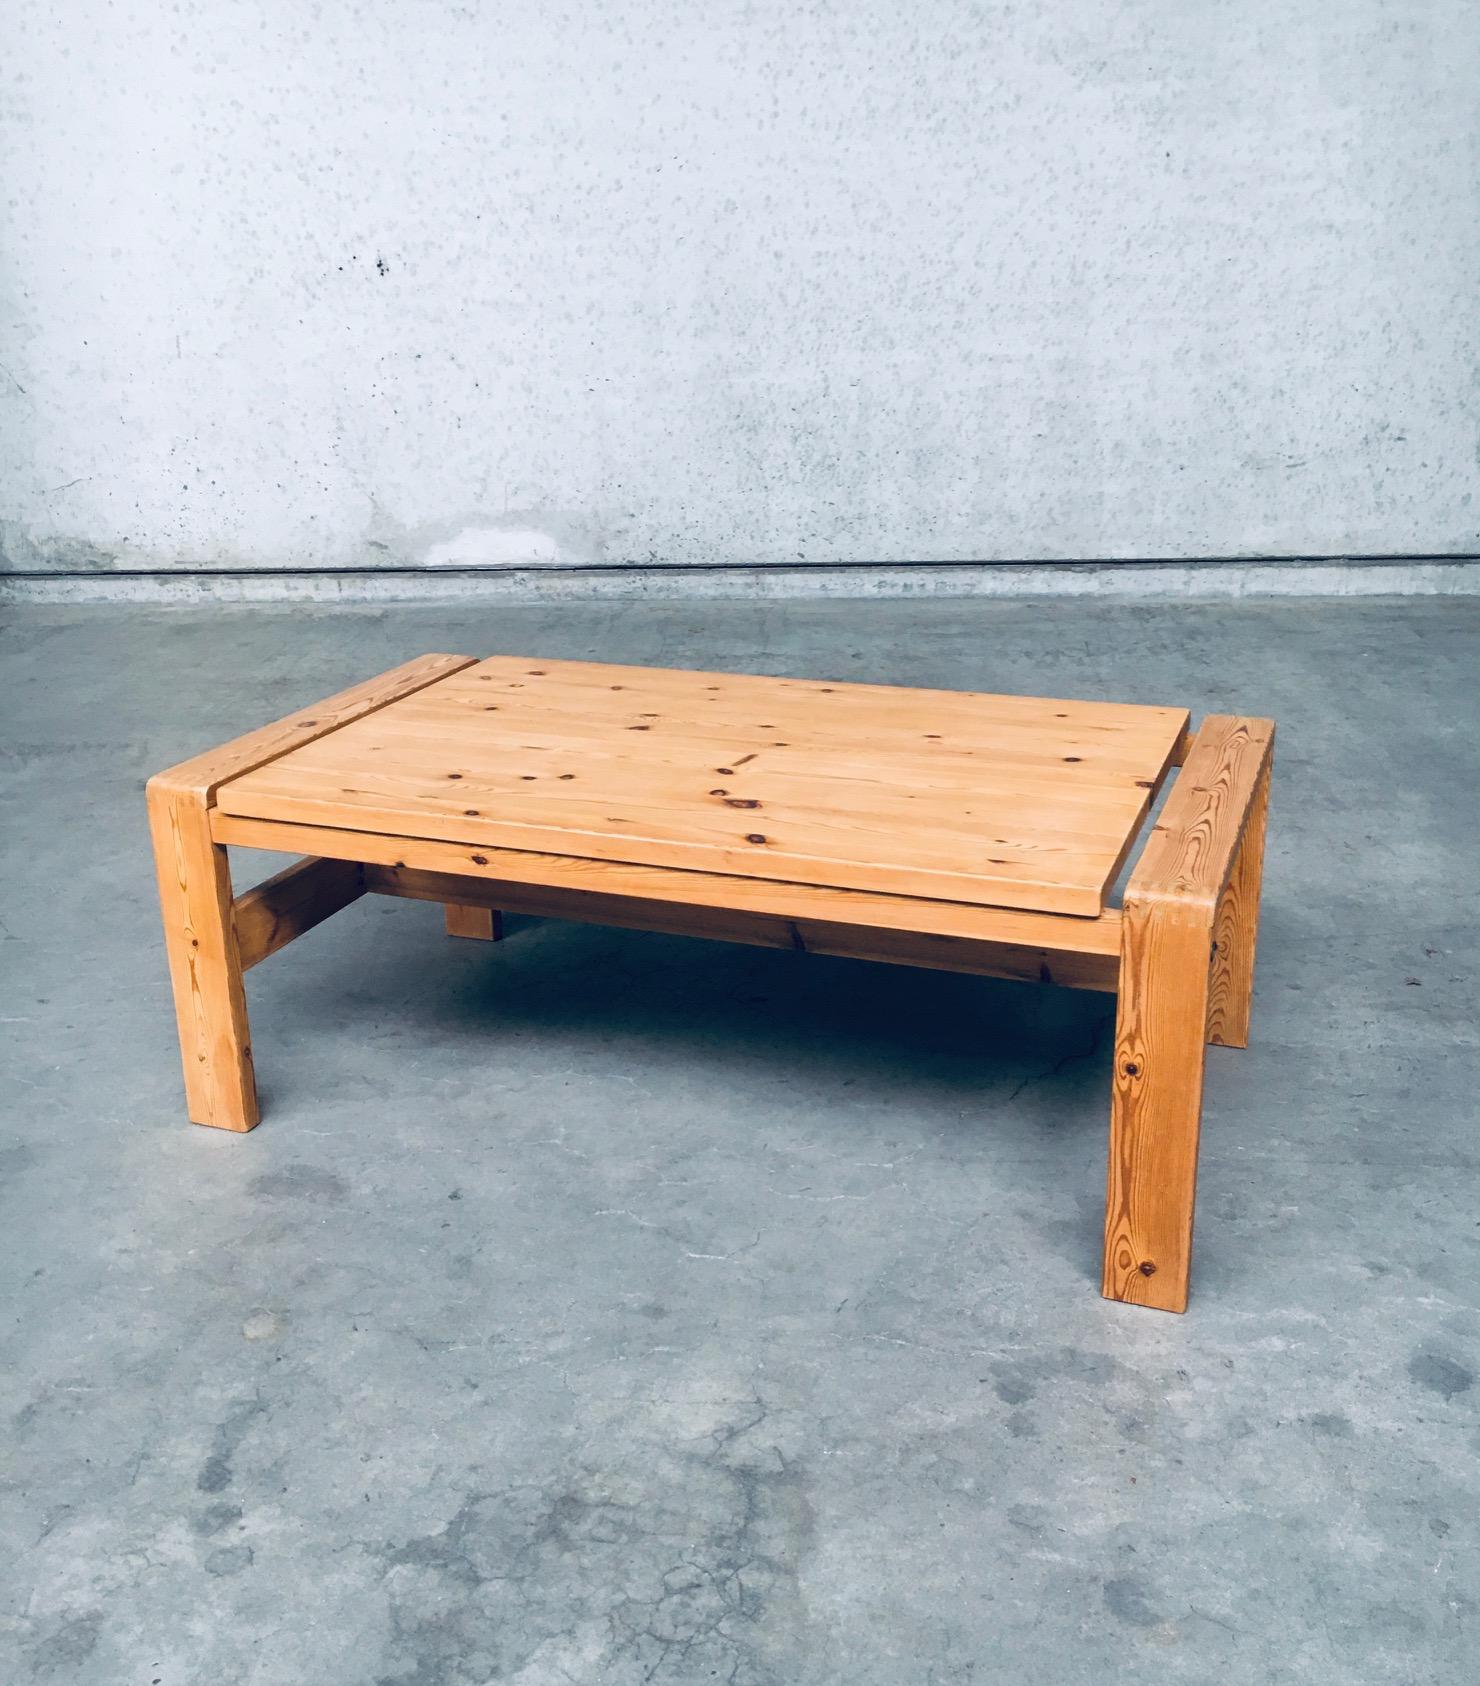 Vintage Scandinavian Danish Modern Design pine coffee table, made in Denmark, in the 1970's period. Solid pine wood constructed coffee table. Marked, Made in Denmark. In the style of Sven Larsson. This has been sanded and varnished. There's some